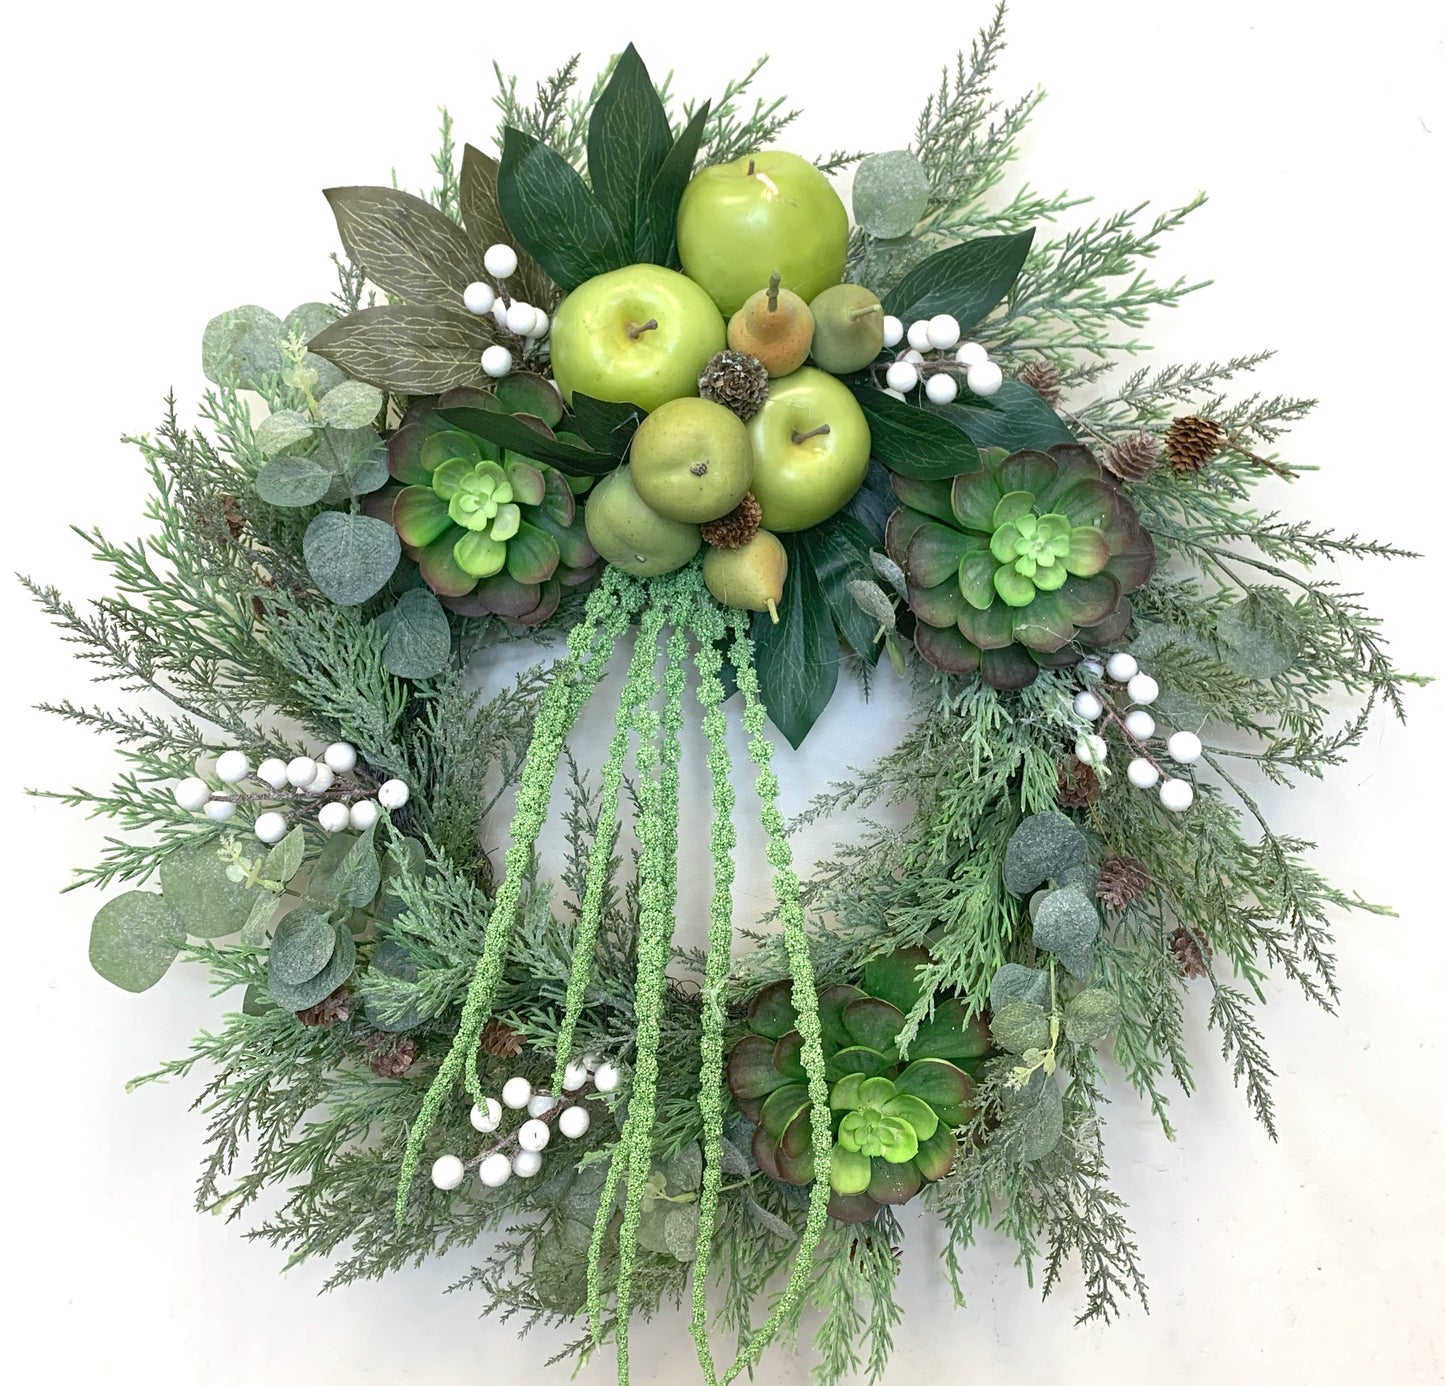 Bright Green Wreath with Apples